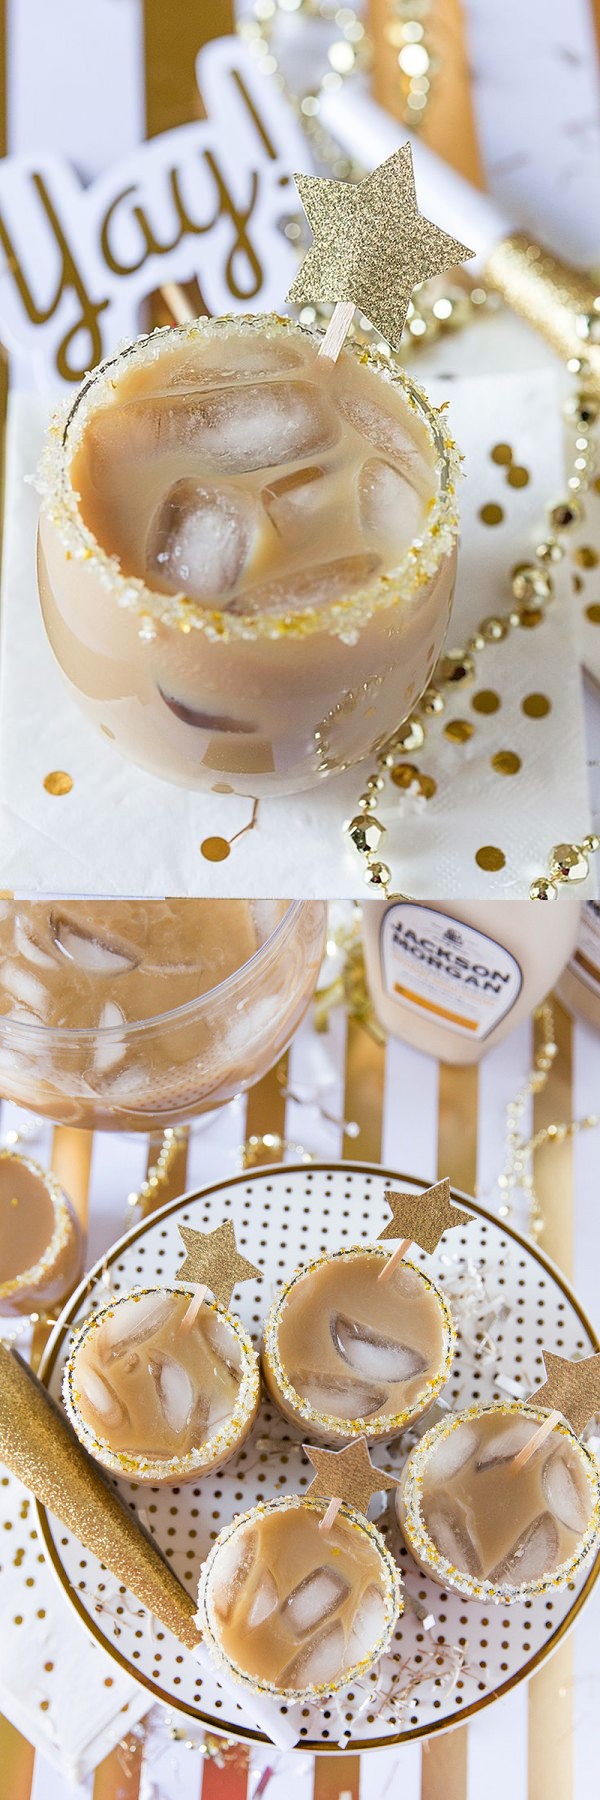 Salted Caramel Iced Coffee Cocktail